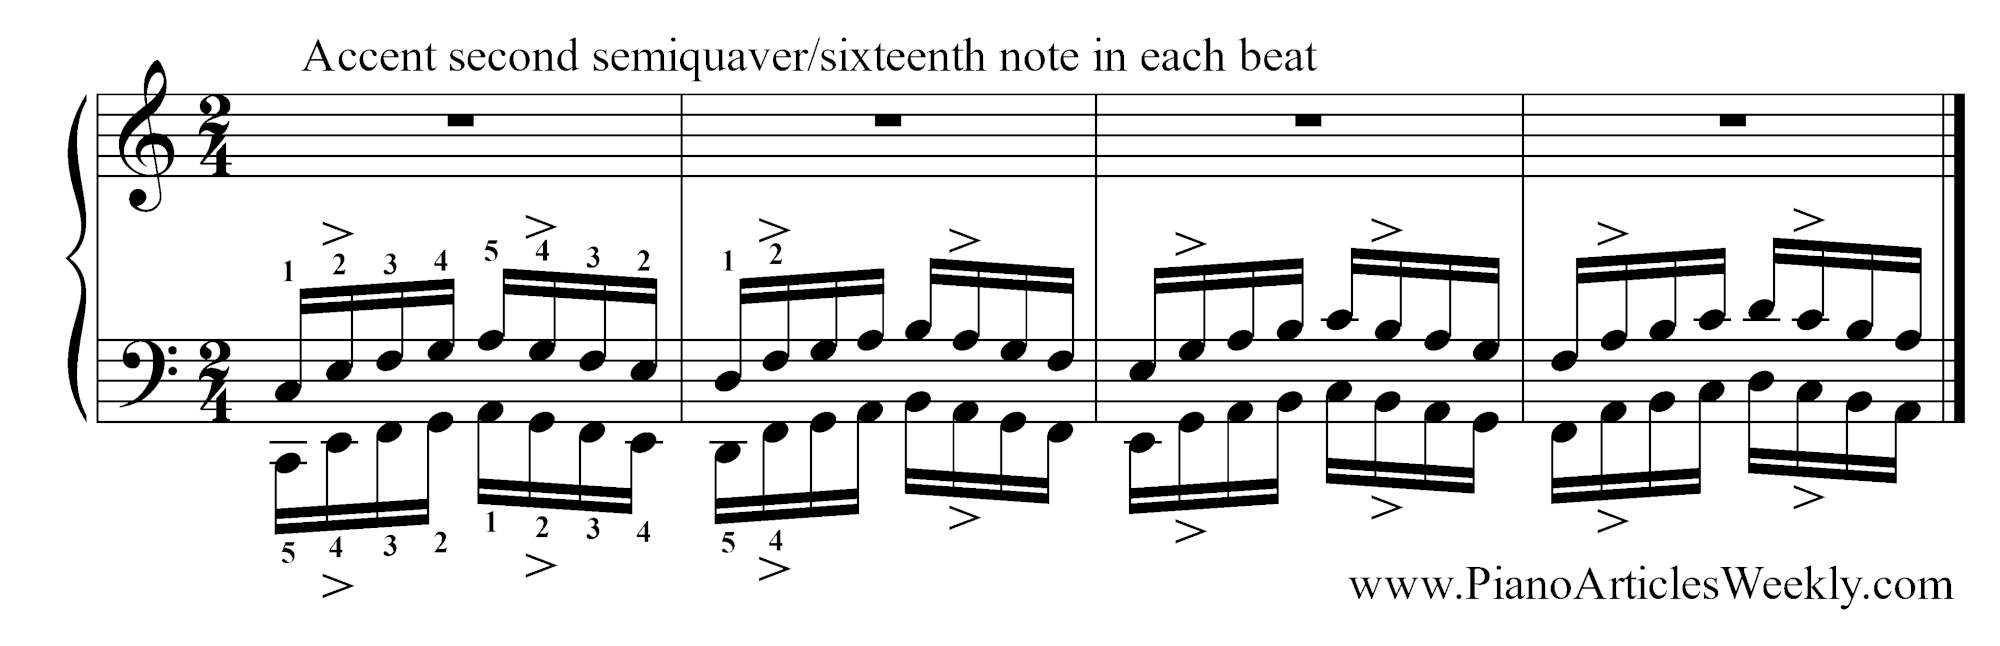 Hanon-Exercise-accent-second-semiquaver_sixteenth-note-in-each-beat